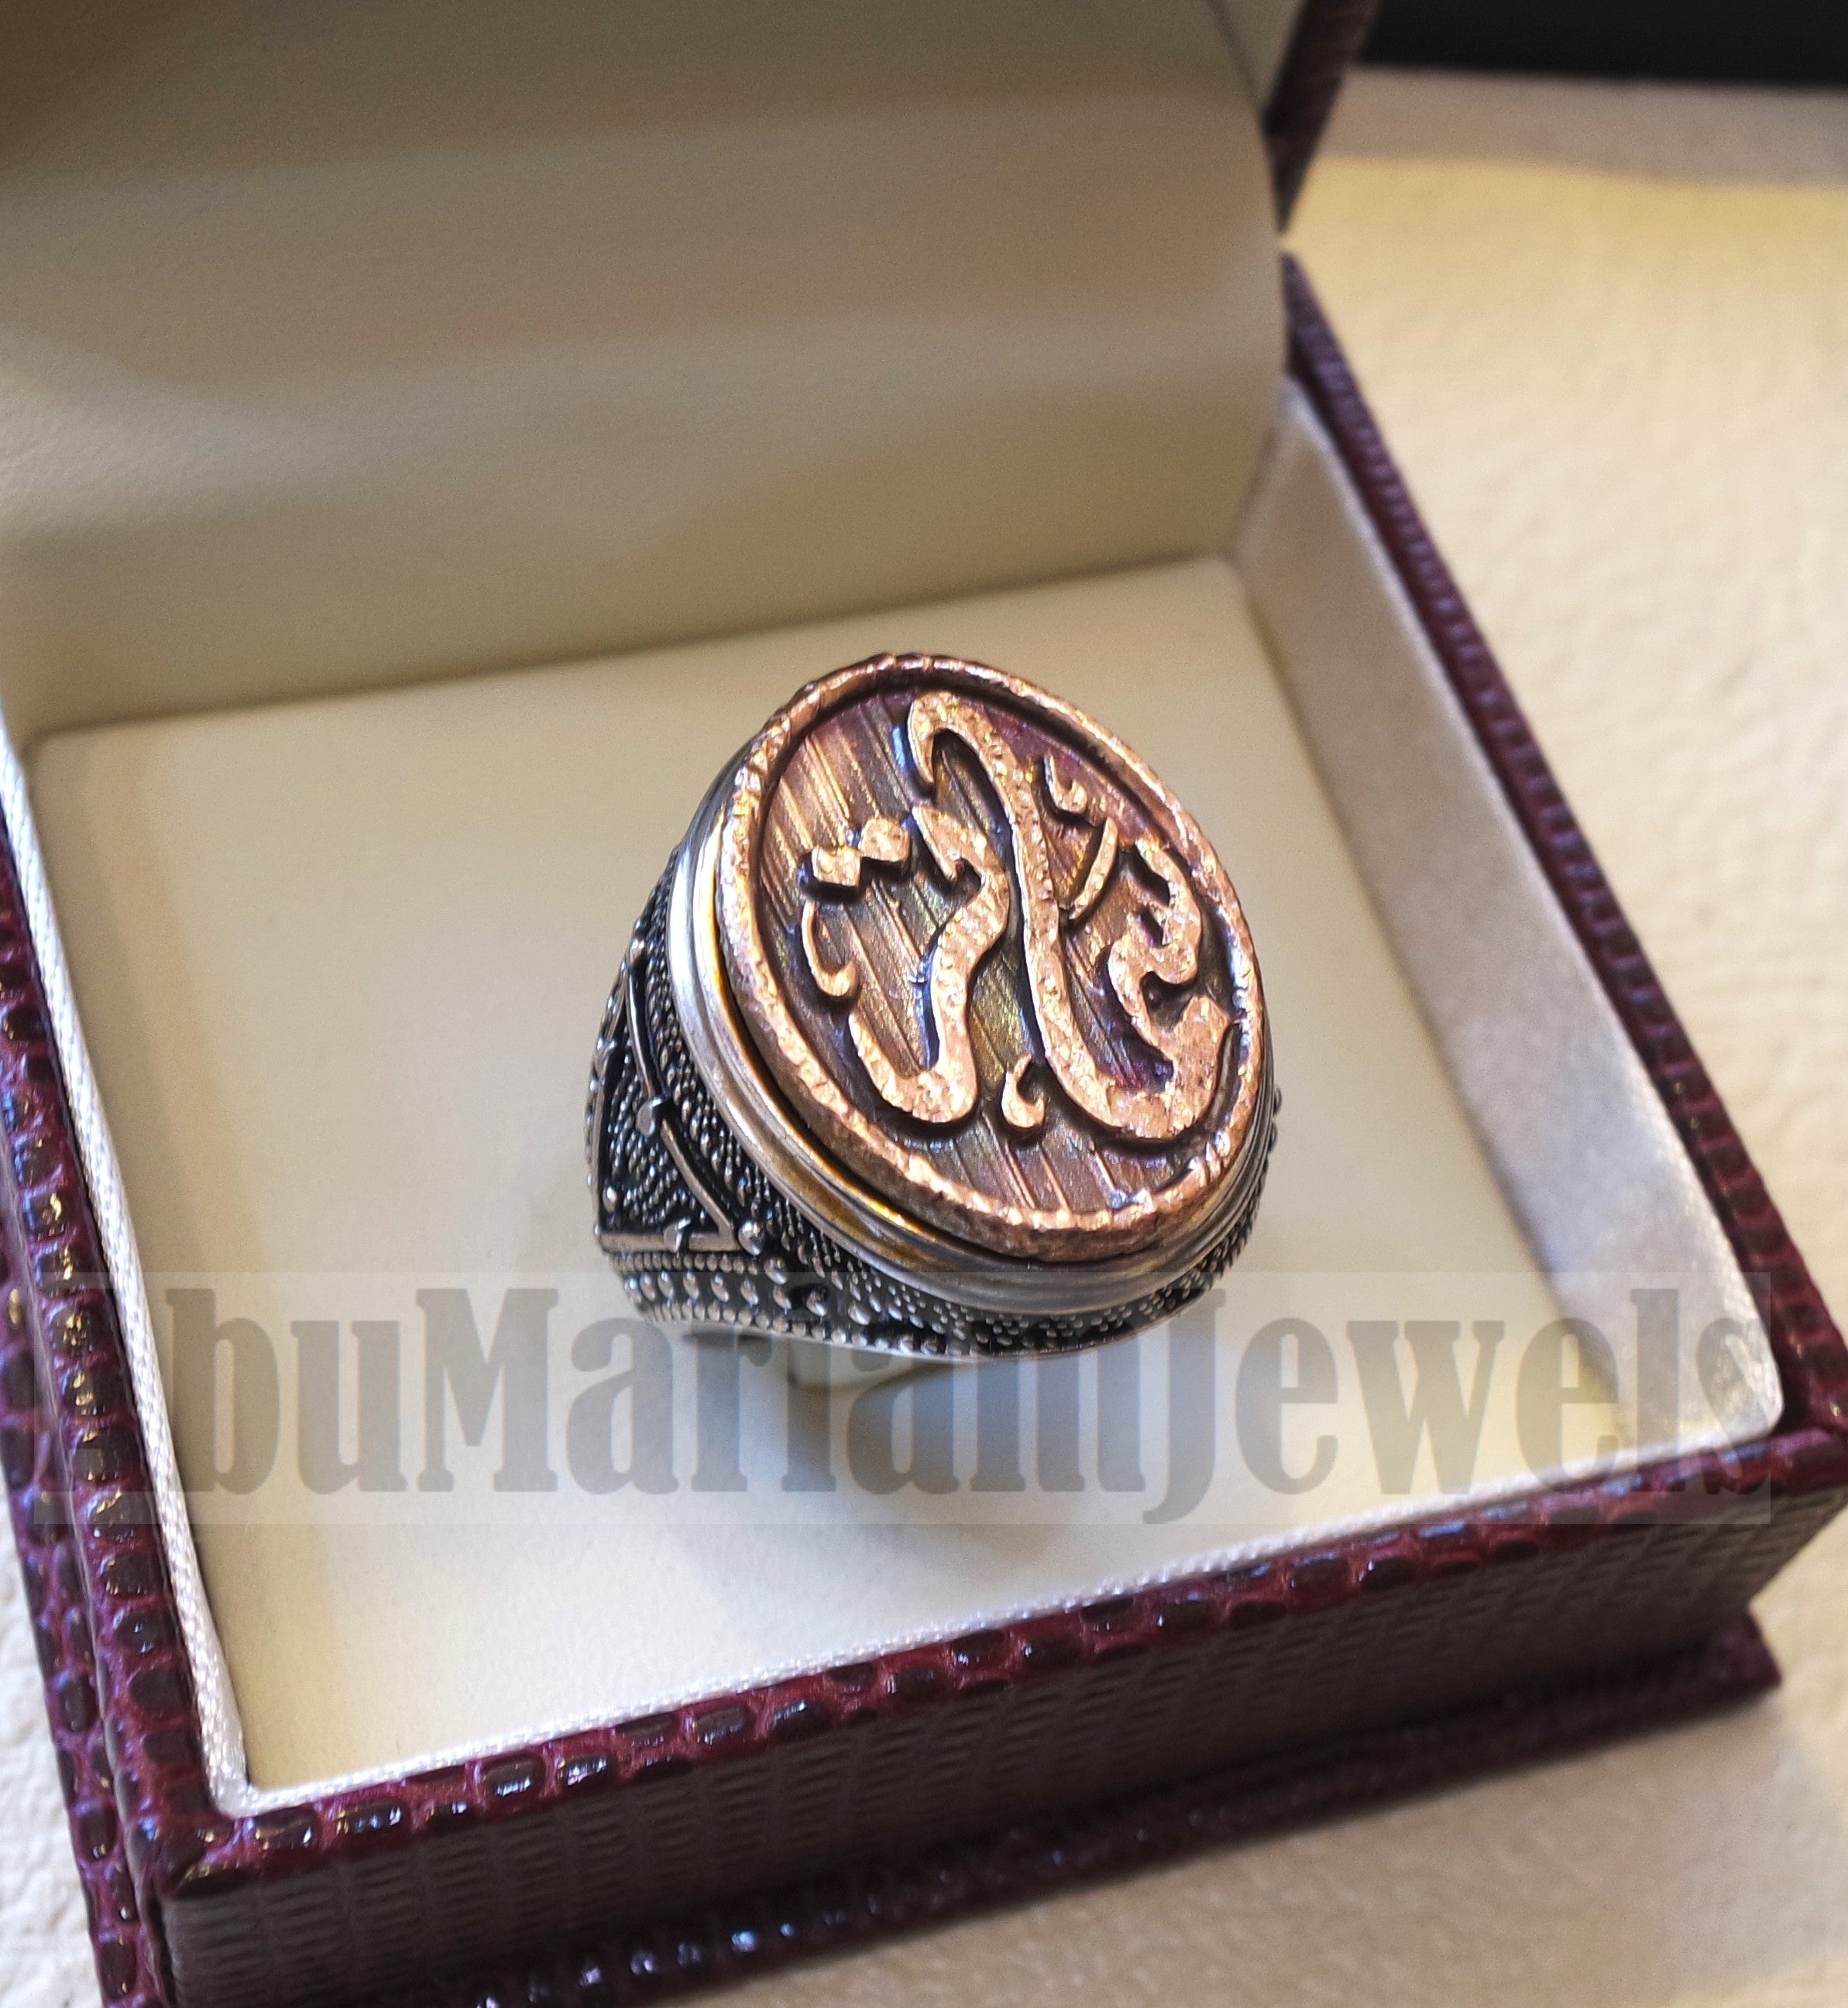 Customized Arabic calligraphy names ring personalized antique jewelry style sterling silver 925 and bronze any size TSB1005 خاتم اسم تفصيل